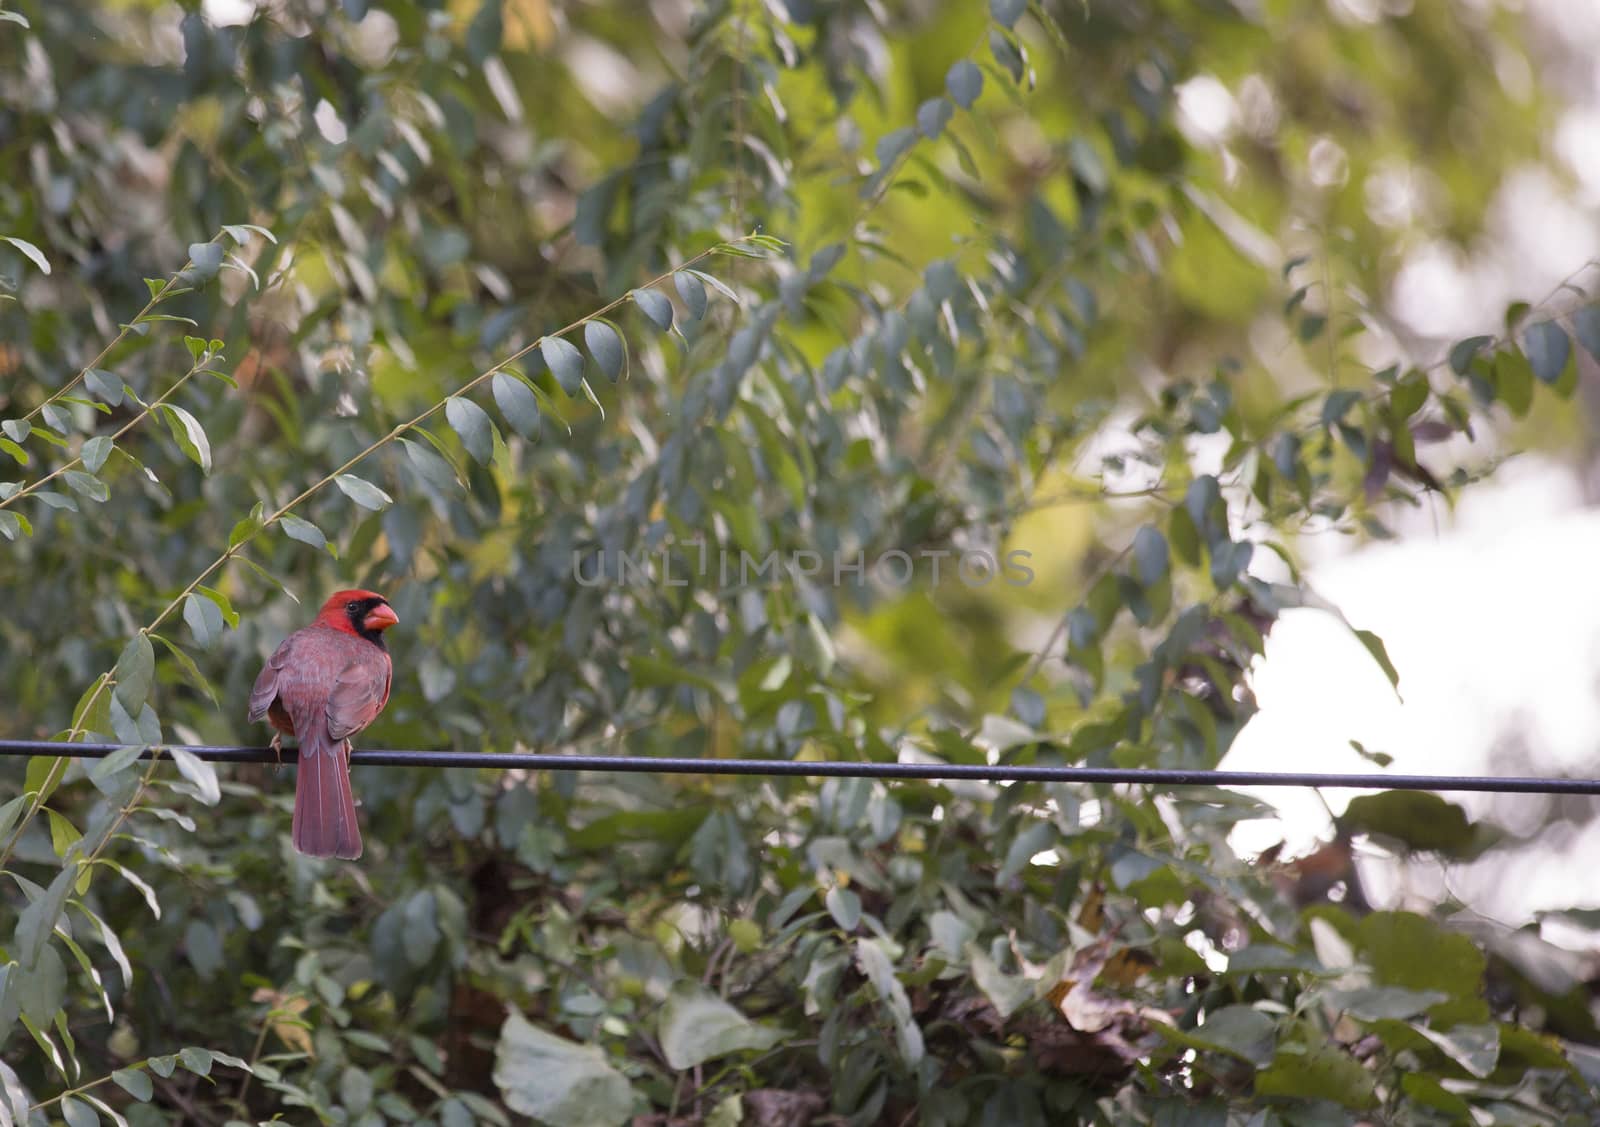 Male cardinal on a wire